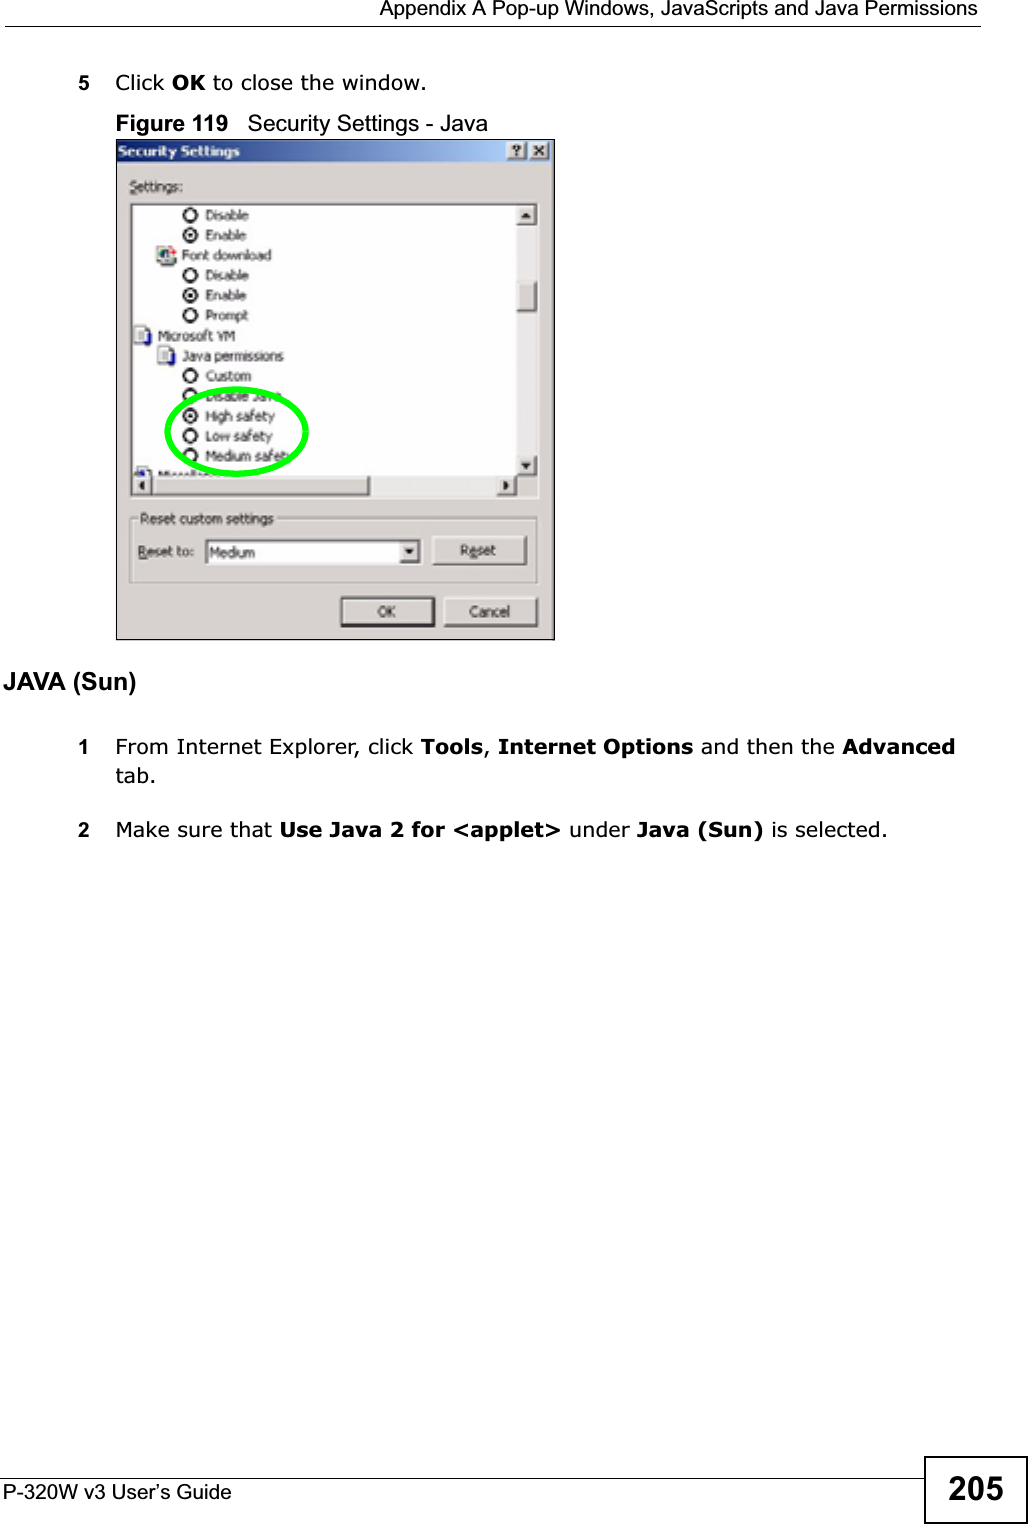  Appendix A Pop-up Windows, JavaScripts and Java PermissionsP-320W v3 User’s Guide 2055Click OK to close the window.Figure 119   Security Settings - Java JAVA (Sun)1From Internet Explorer, click Tools,Internet Options and then the Advancedtab. 2Make sure that Use Java 2 for &lt;applet&gt; under Java (Sun) is selected.